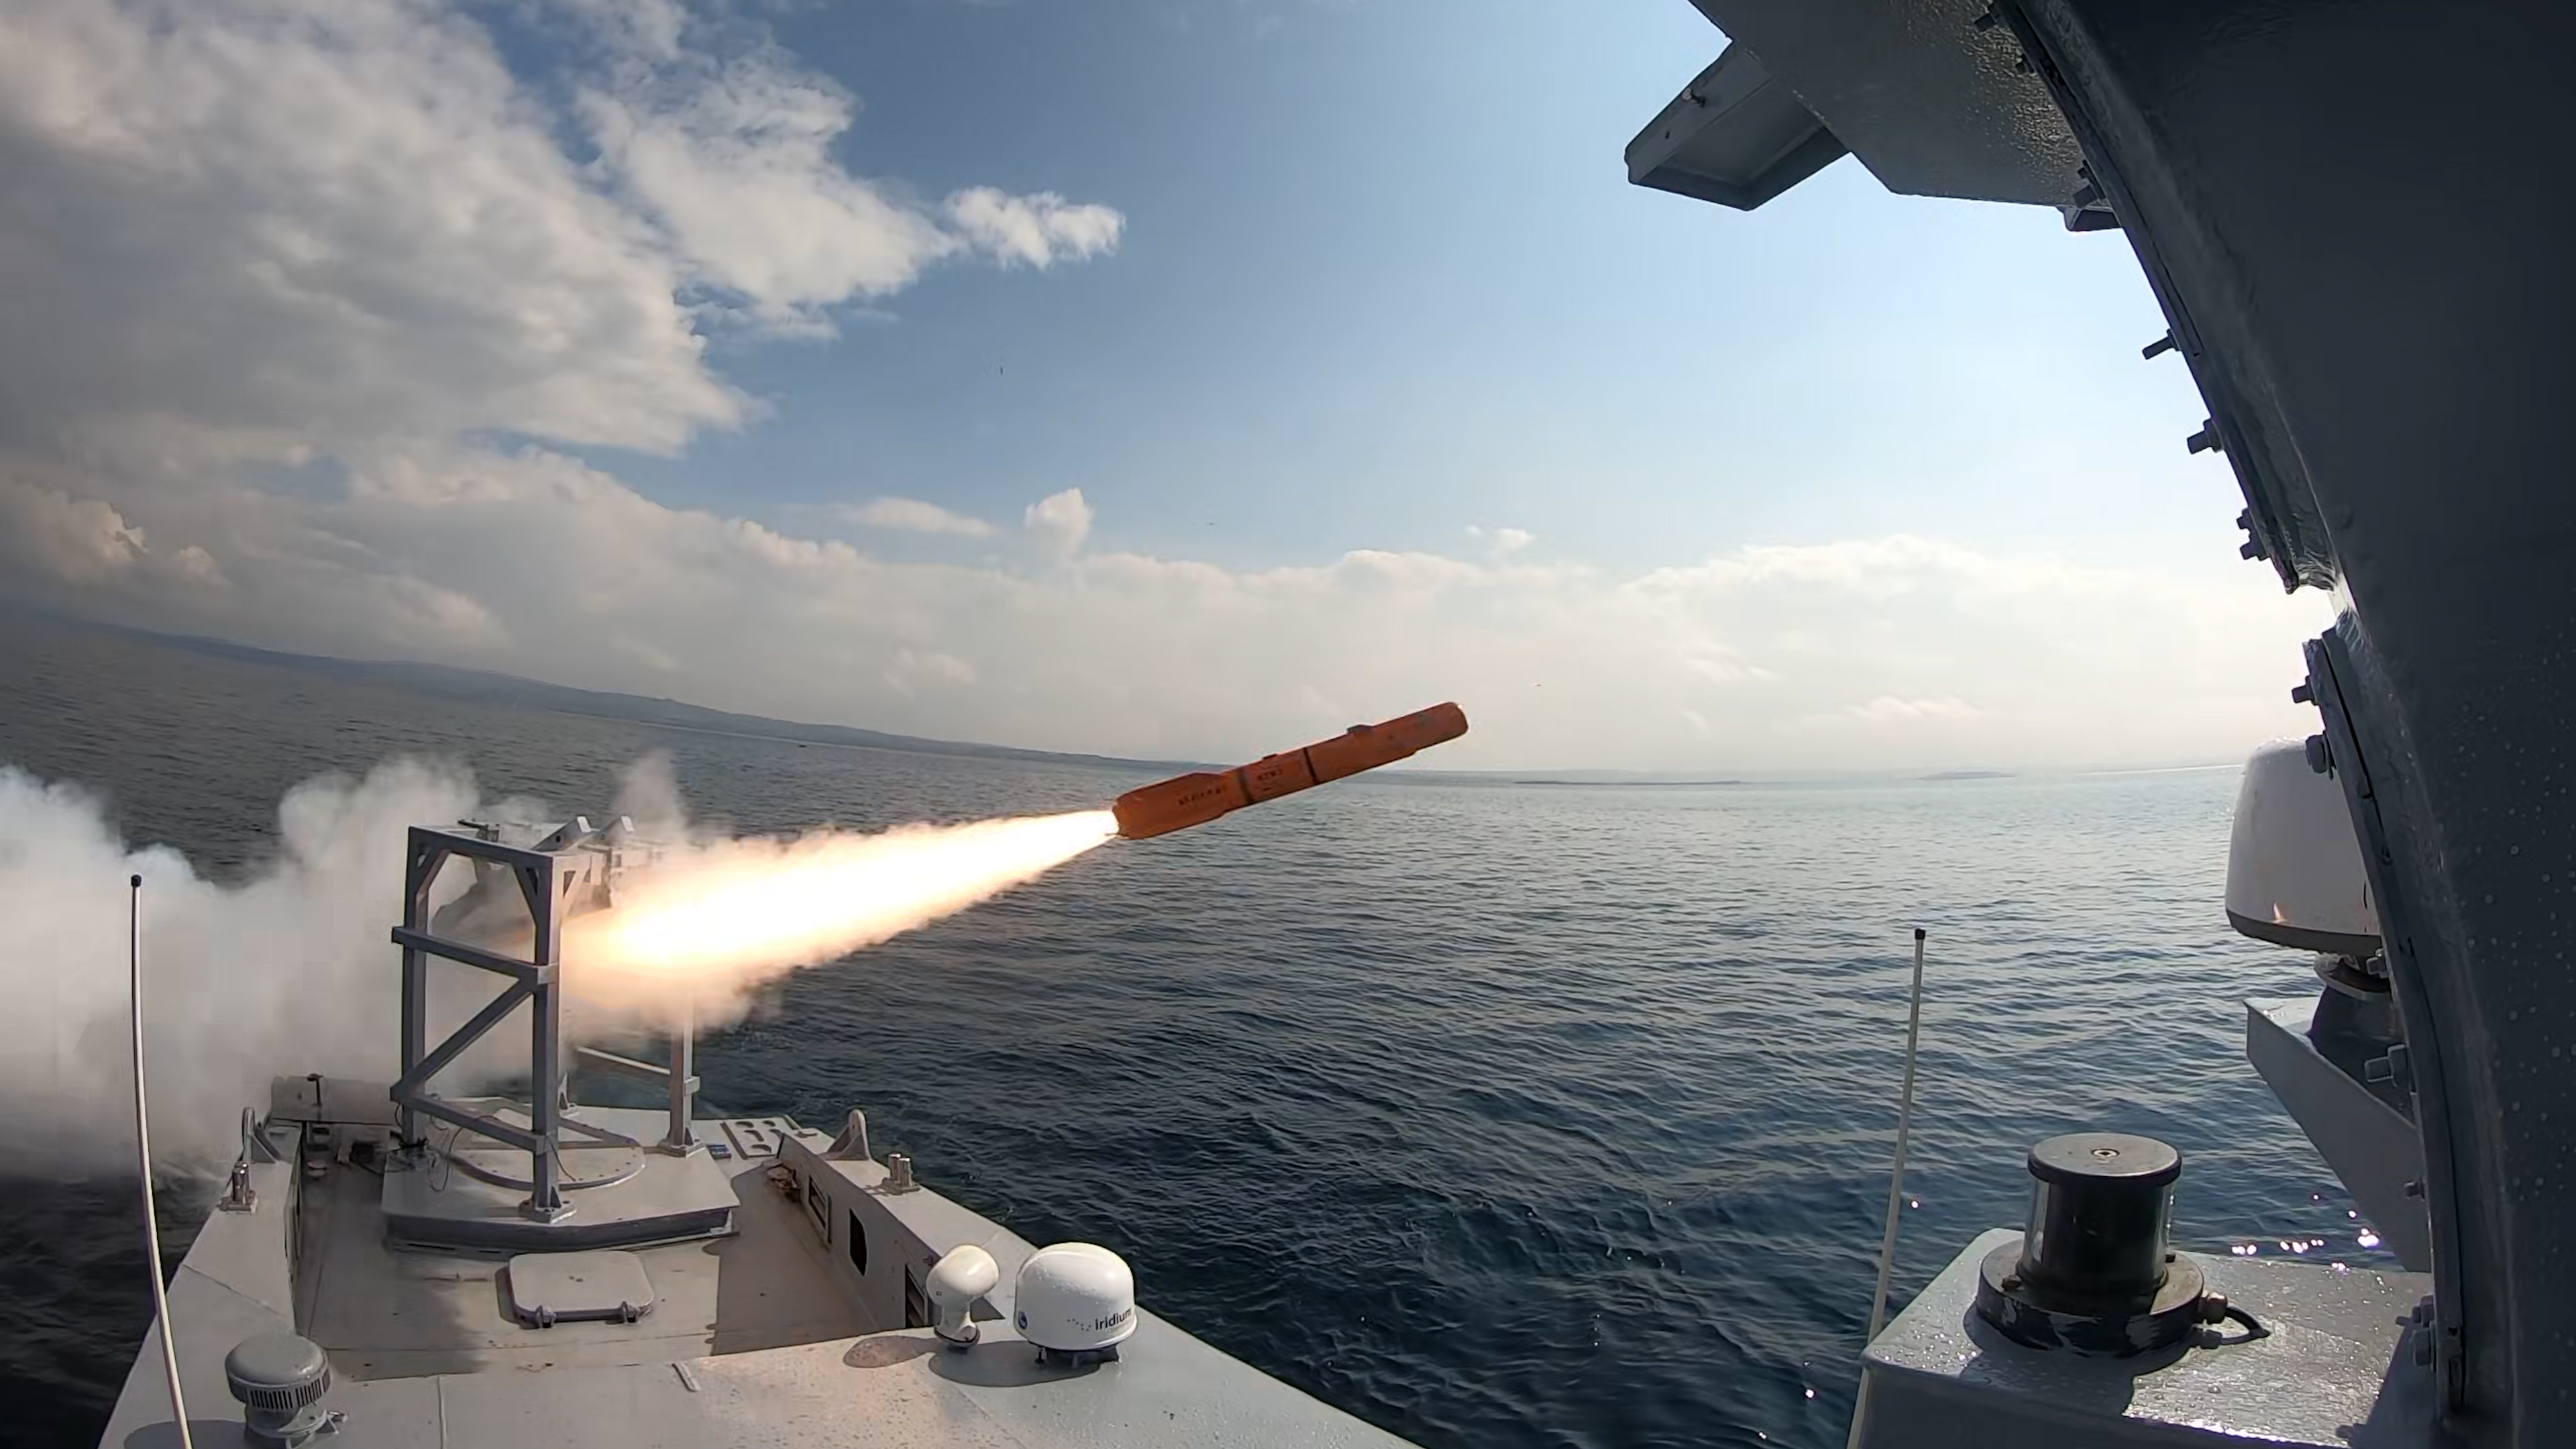 KUZGUN-KY MISSILE LAUNCHED FROM MARLIN AUSV